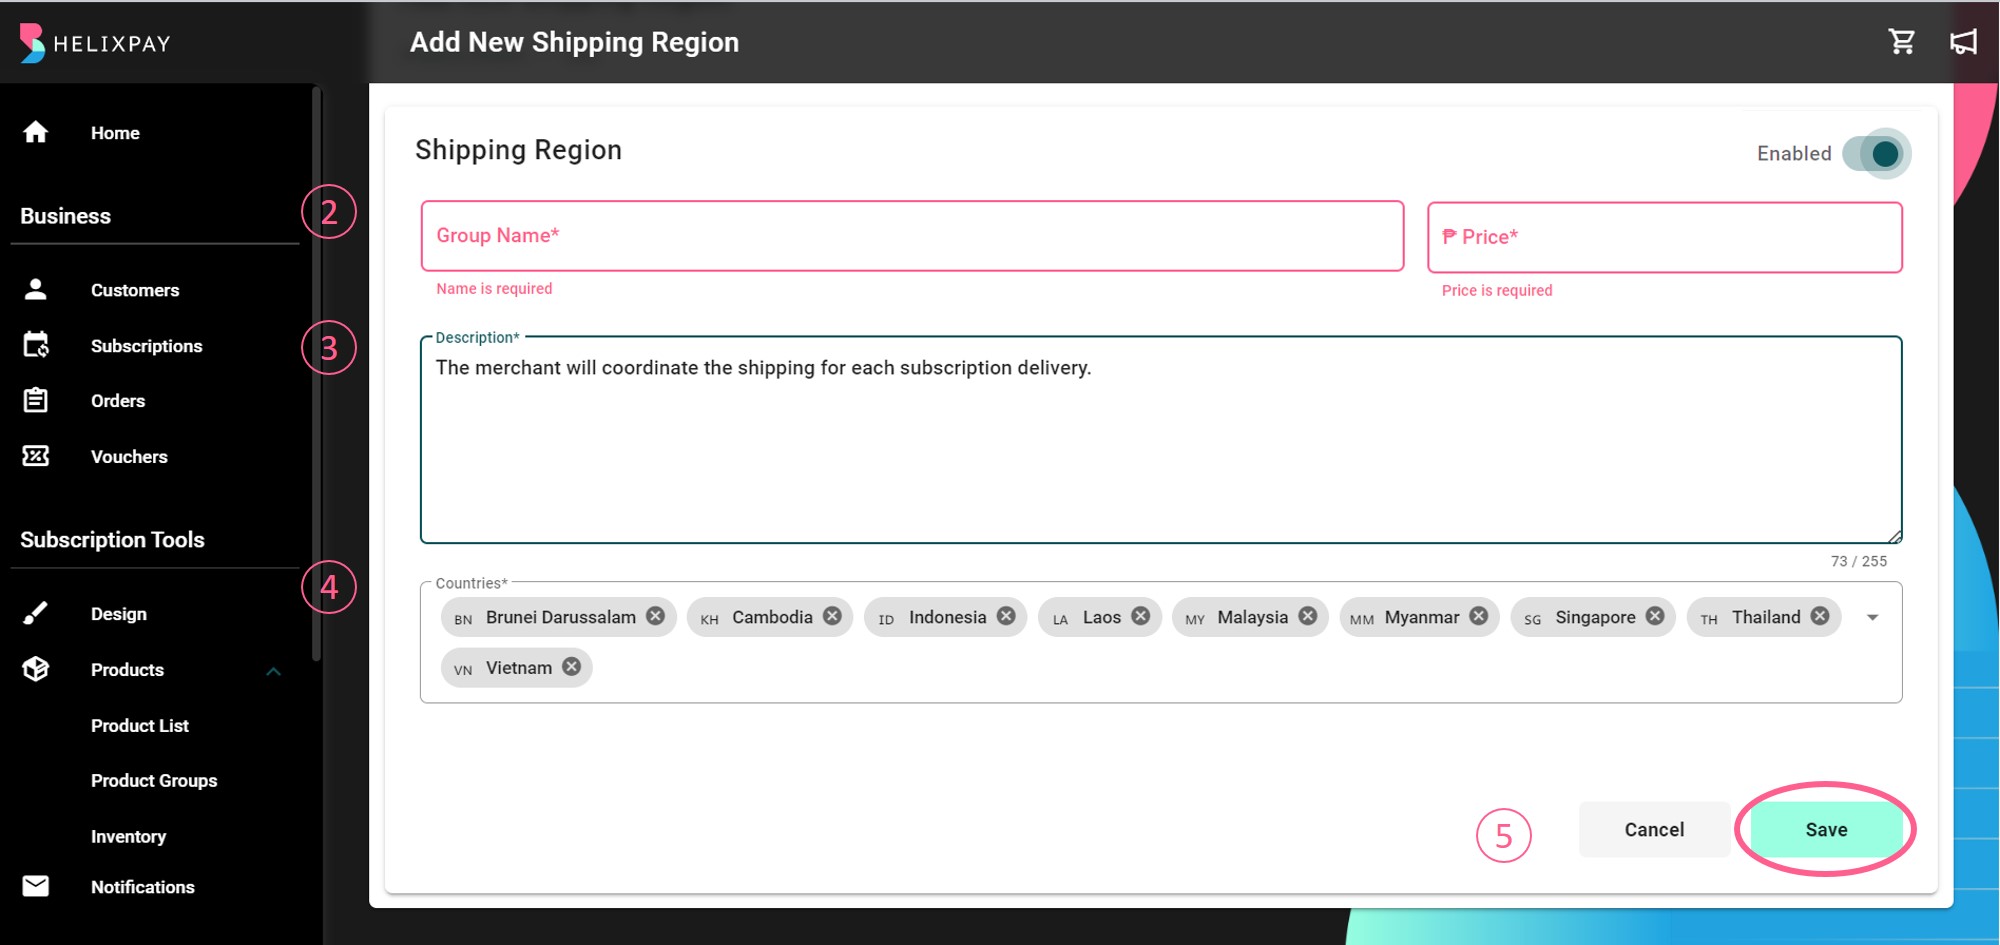 Make sure to enable the shipping region to apply the shipping fee to orders.